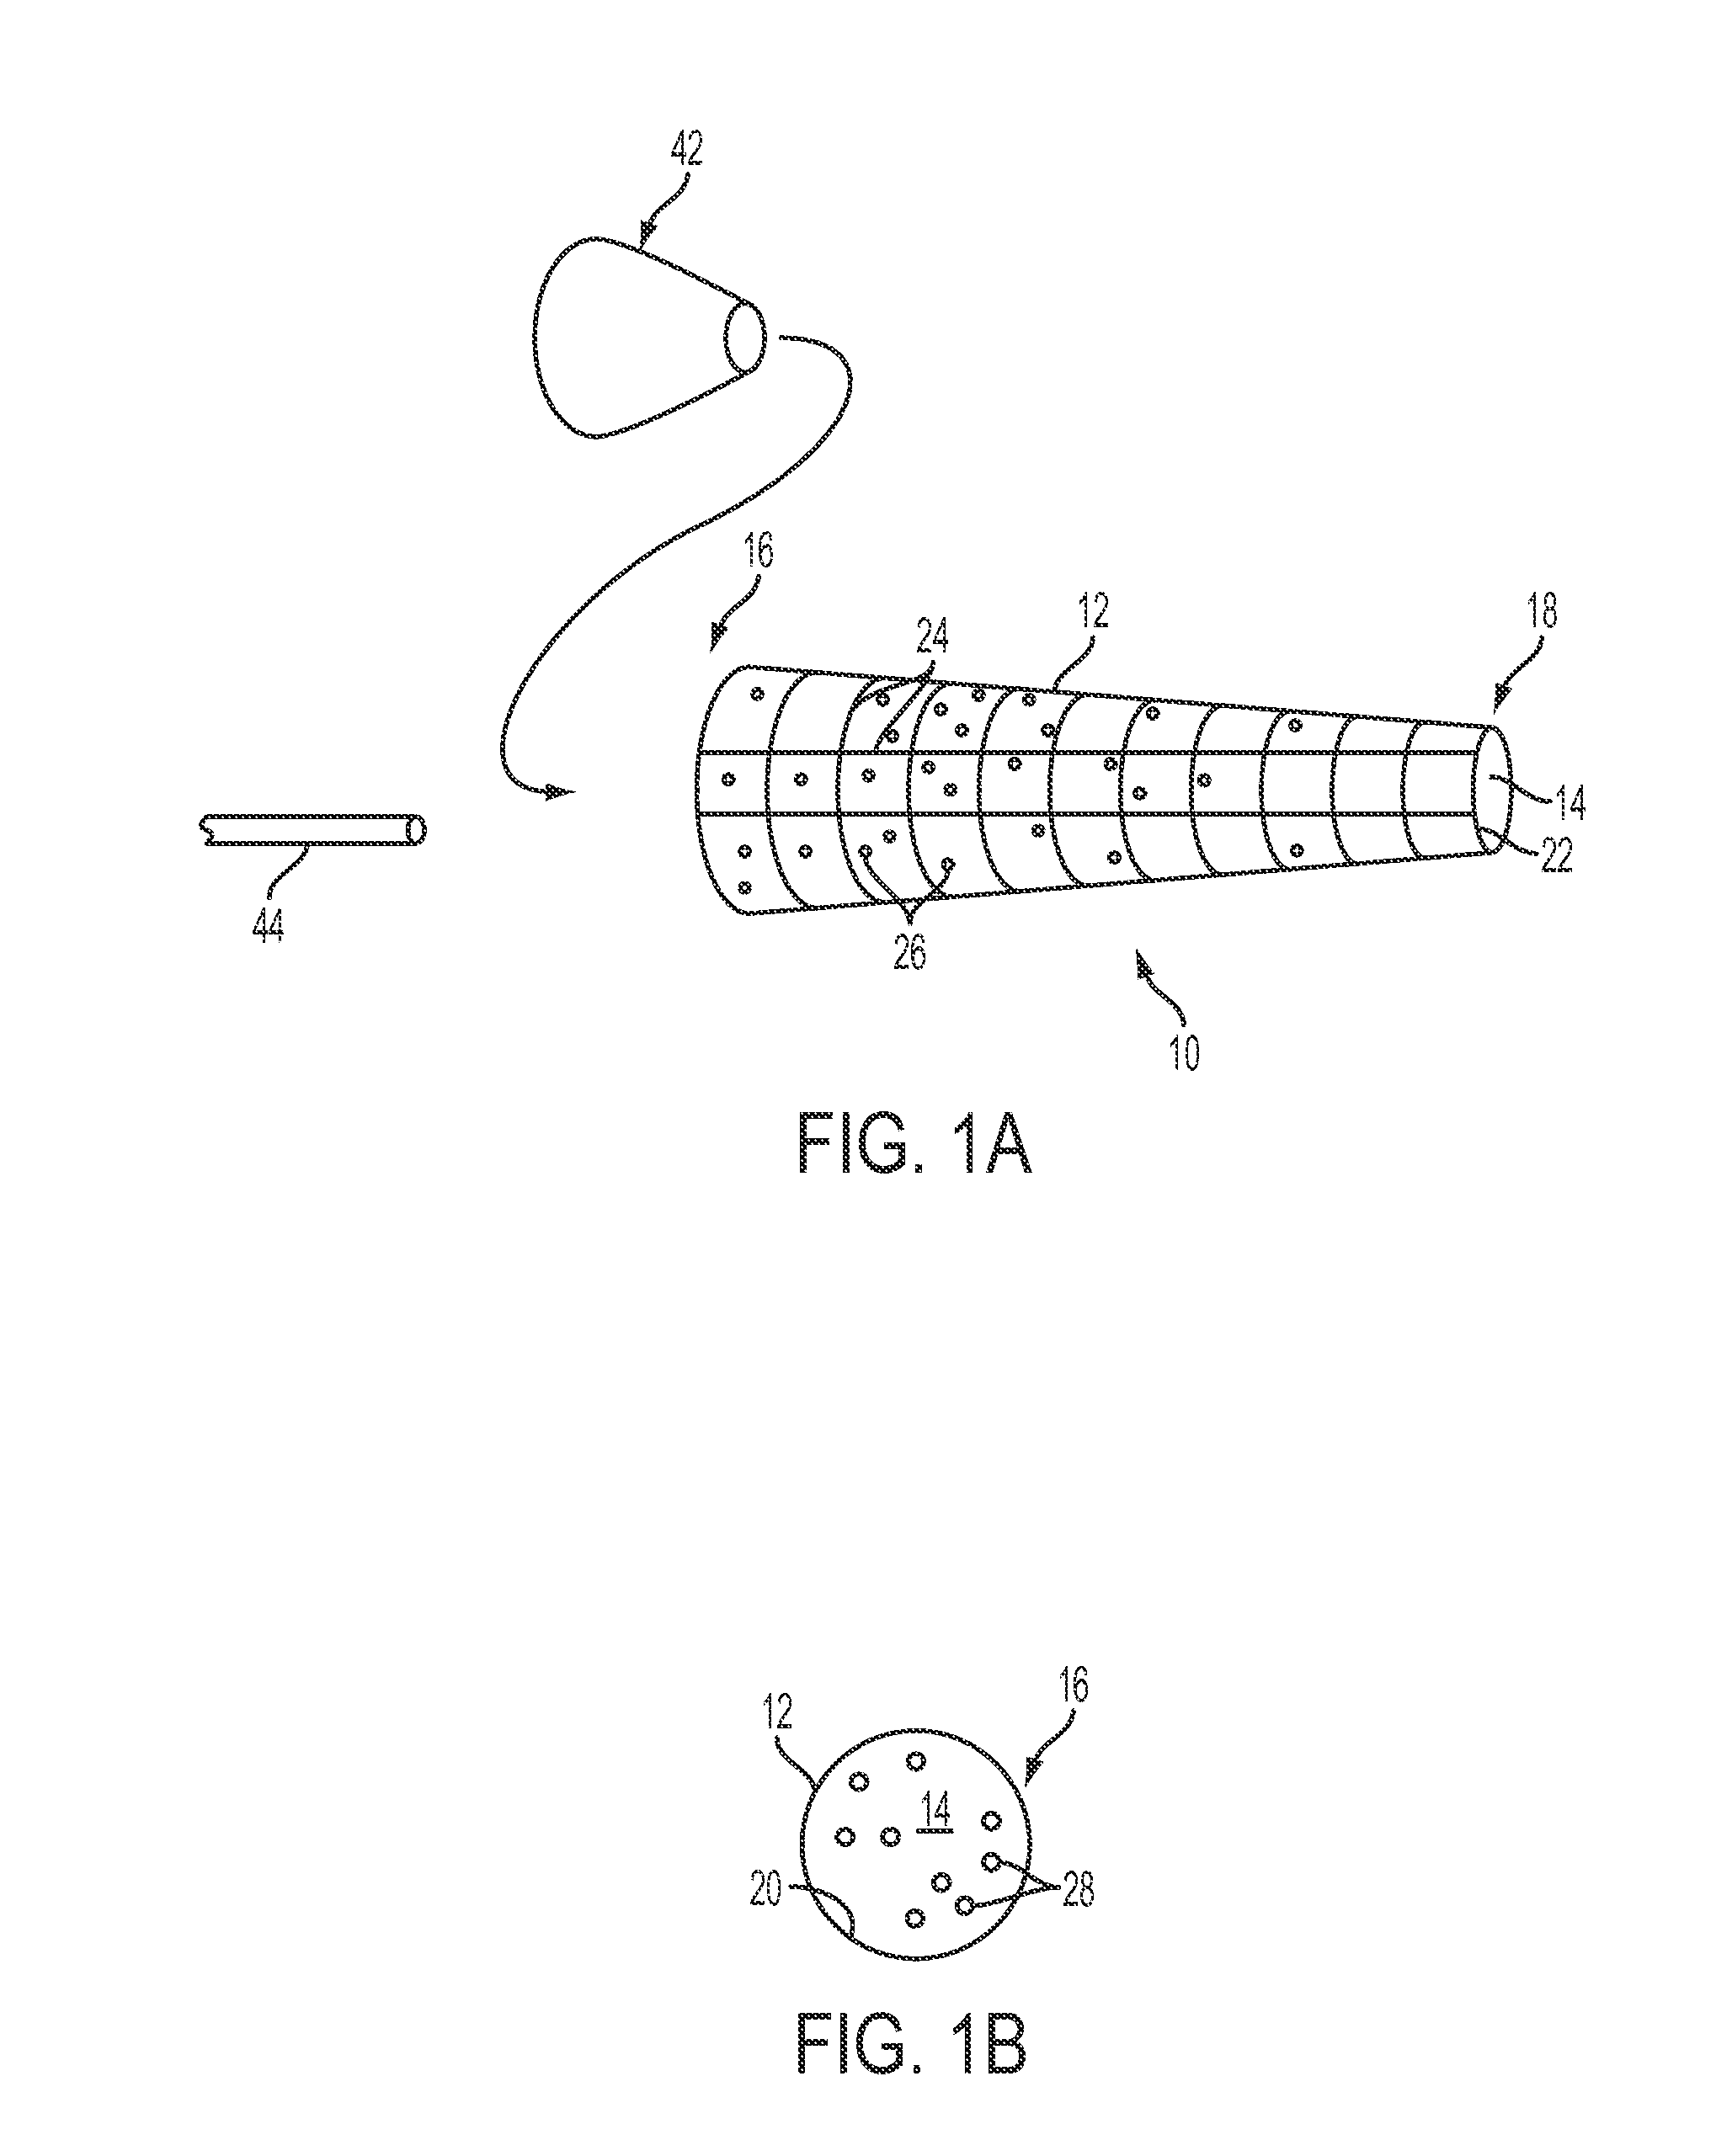 Surgical screw hole liner devices and related methods